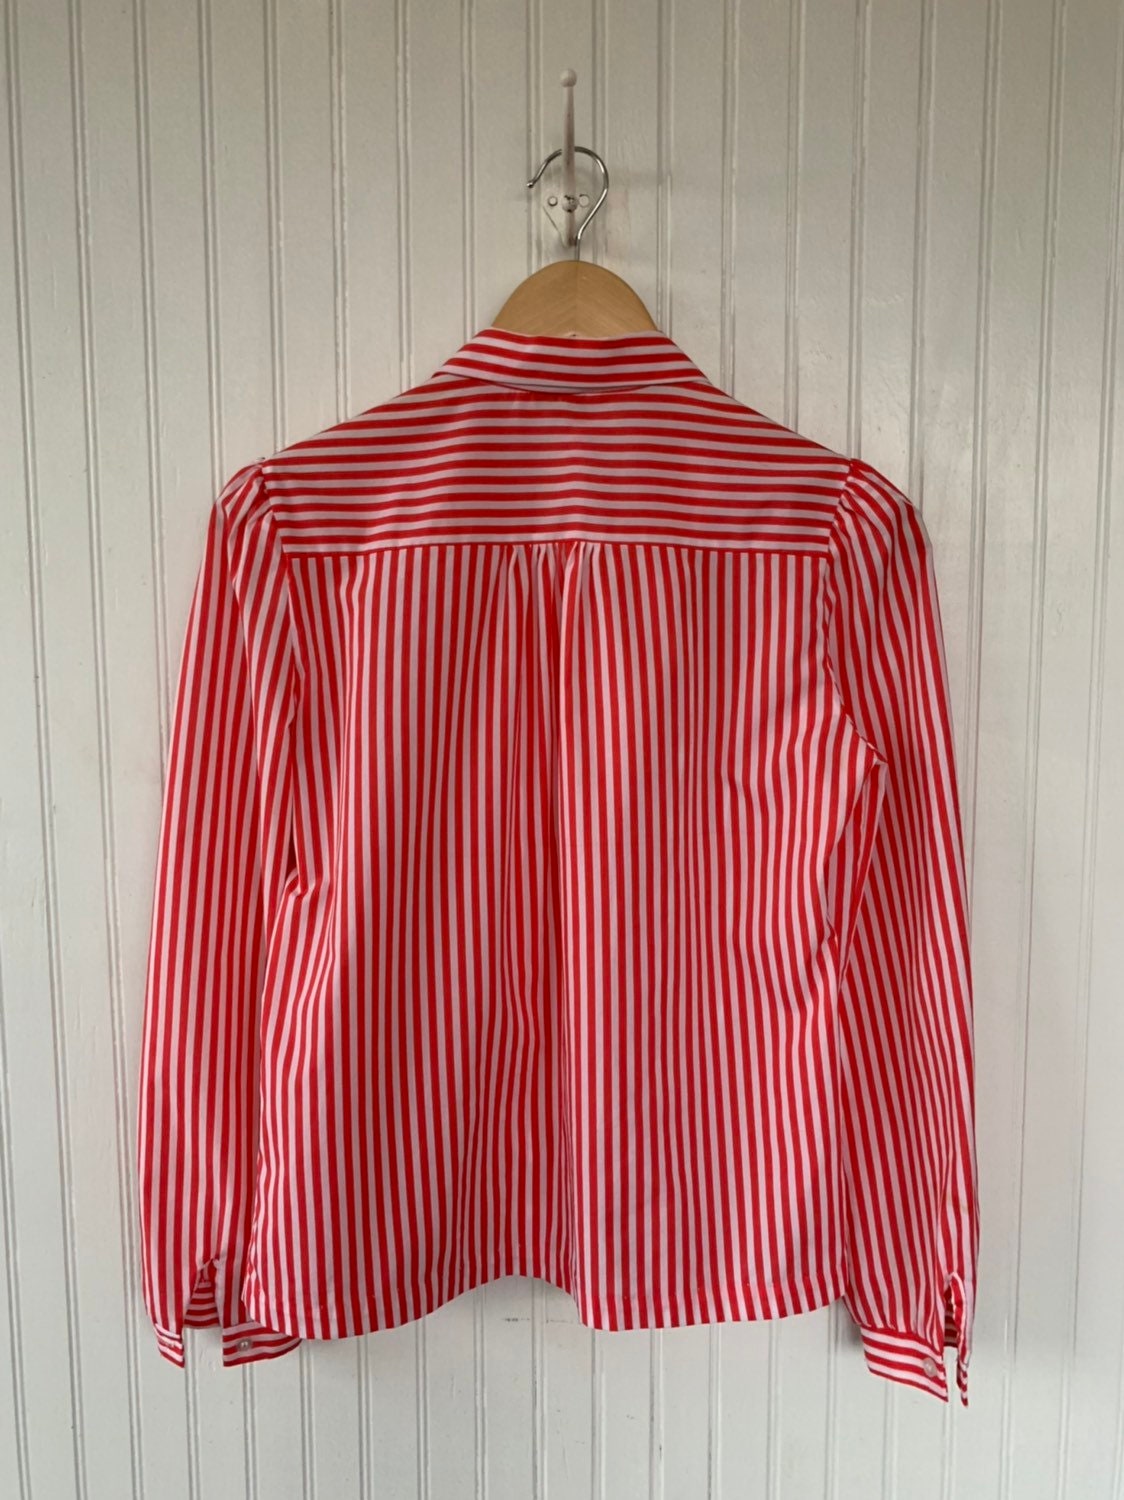 Vintage Red White Striped Button Down Shirt Small Medium S/M Blouse ...